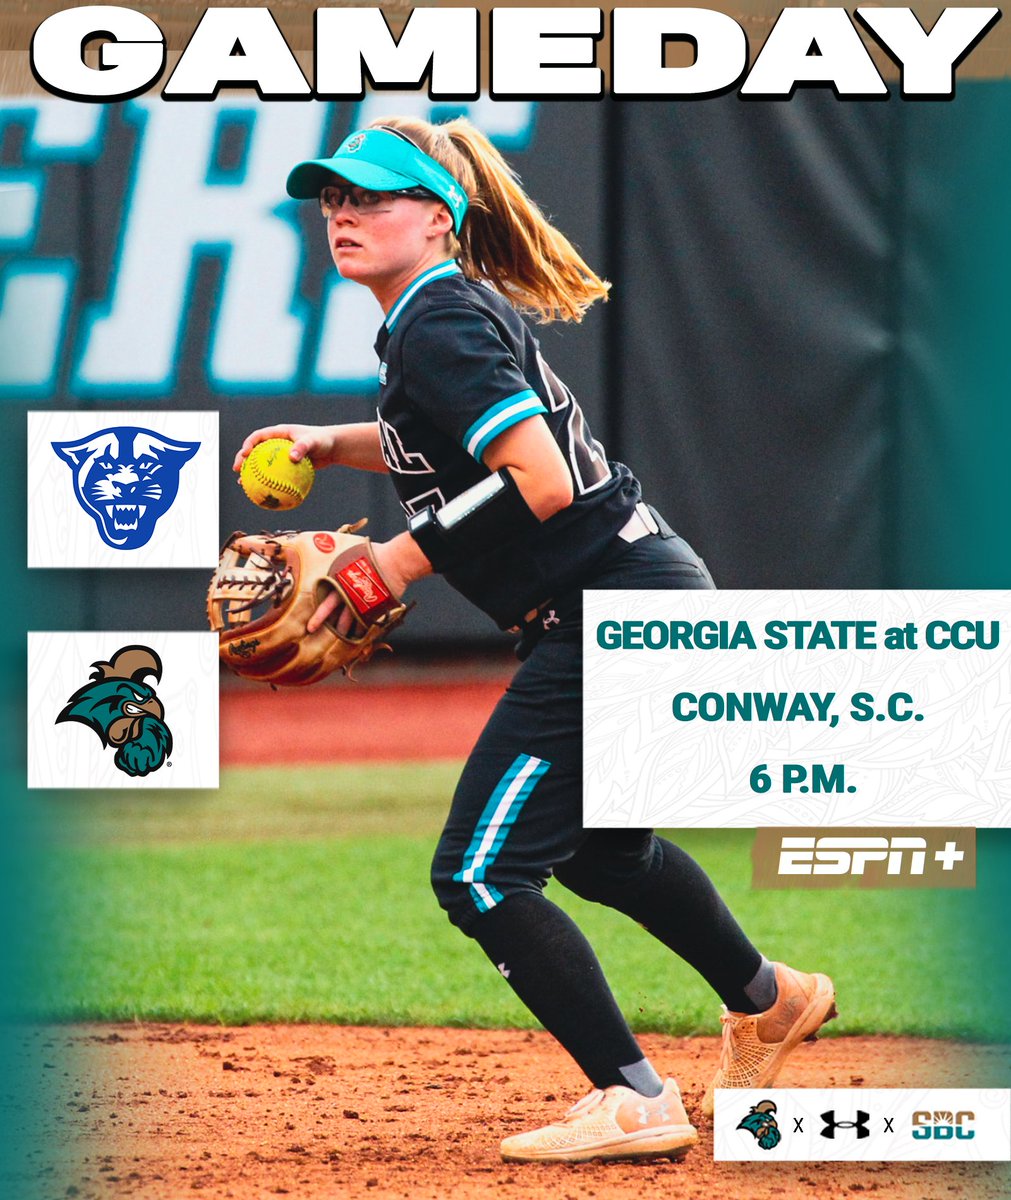 GAMEDAY 🥎 Location: Conway, S.C. Opponent: Georgia State Time: 6 p.m. ET #ChantsUp #TEALNATION